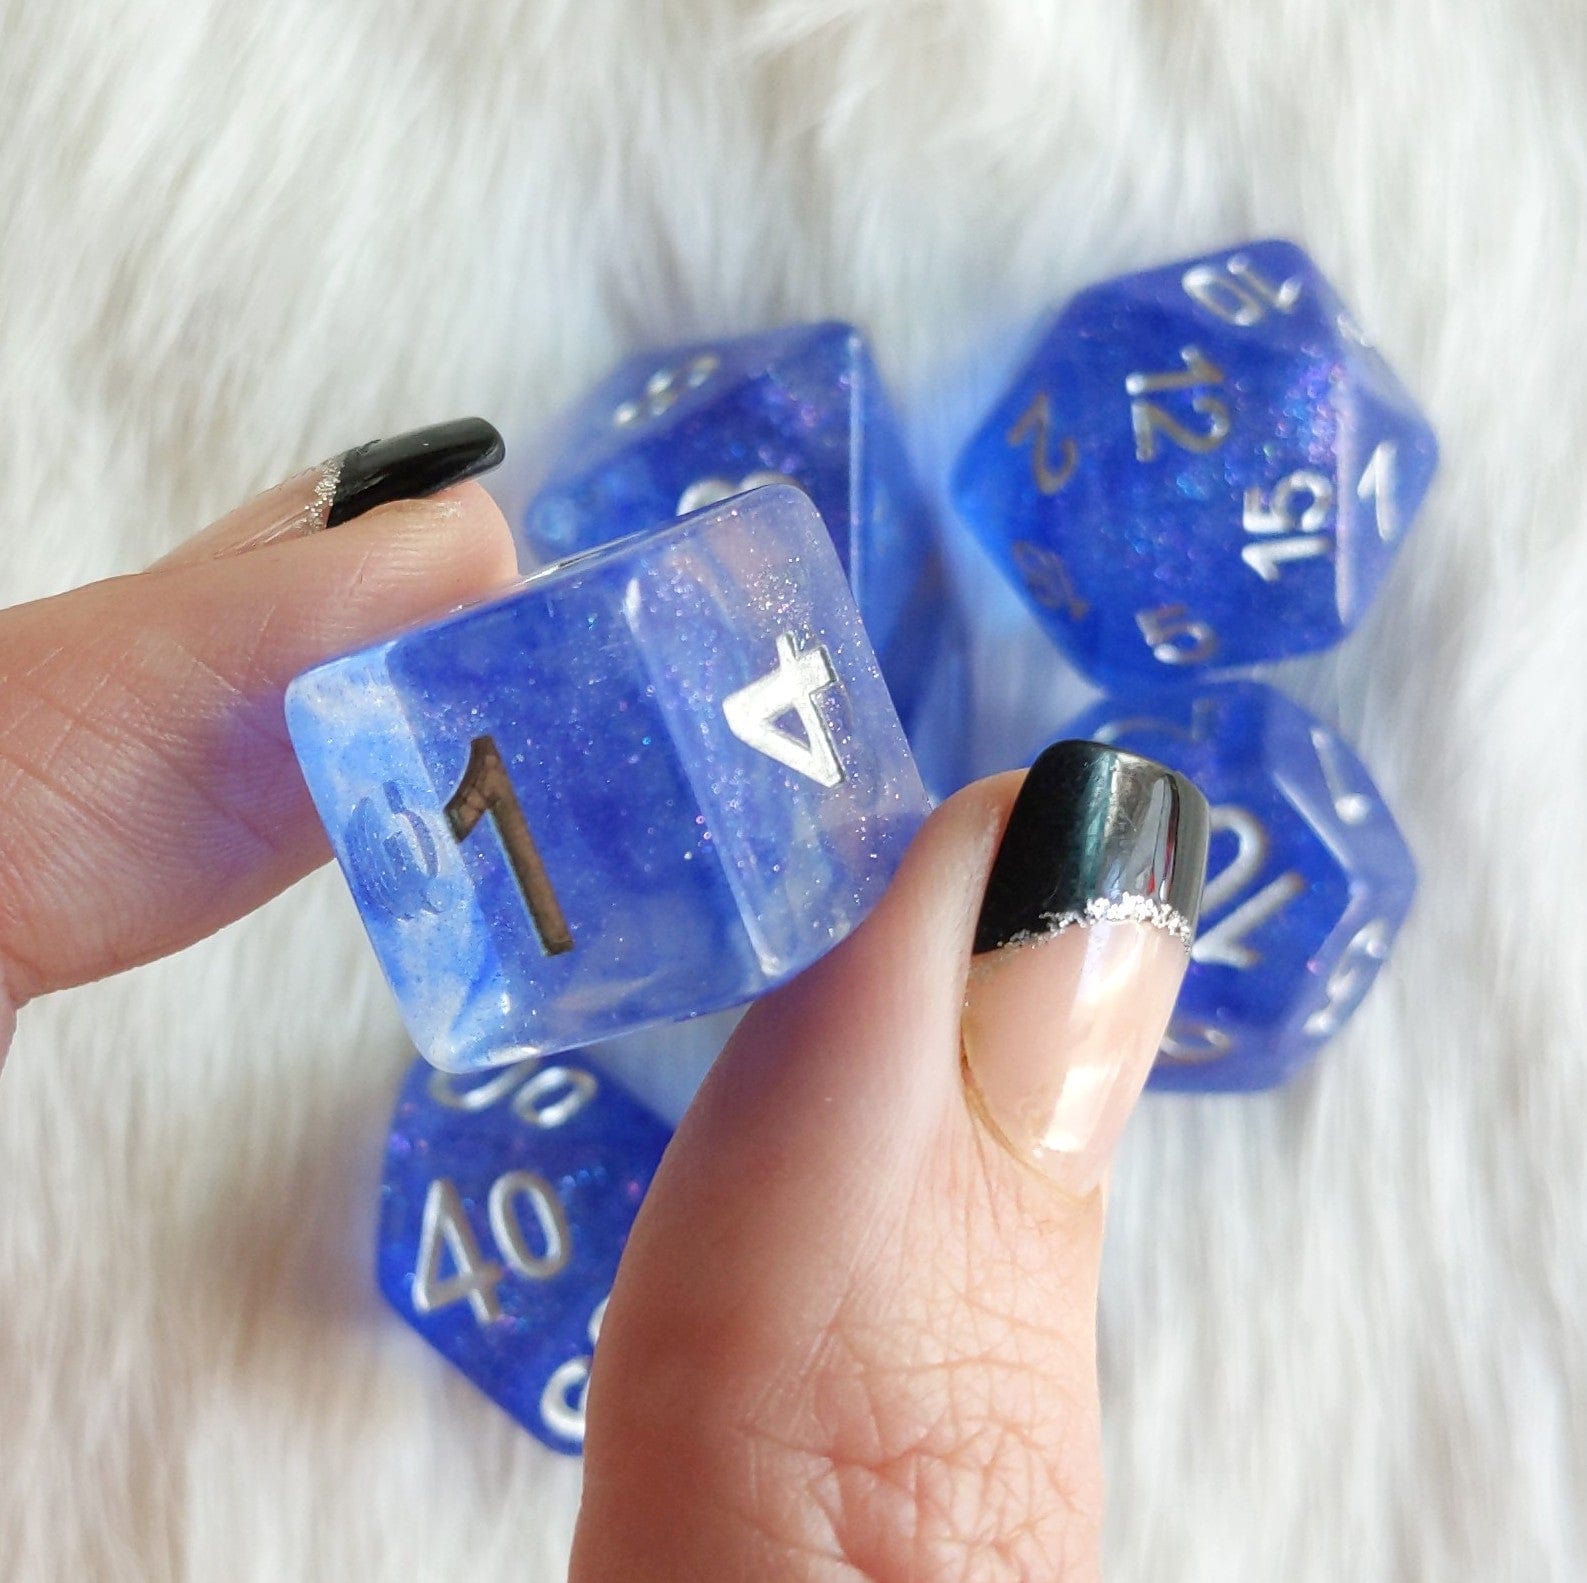 Blue Veil Dice Set. Clear resin dice with blue clouds and glitter - CozyGamer